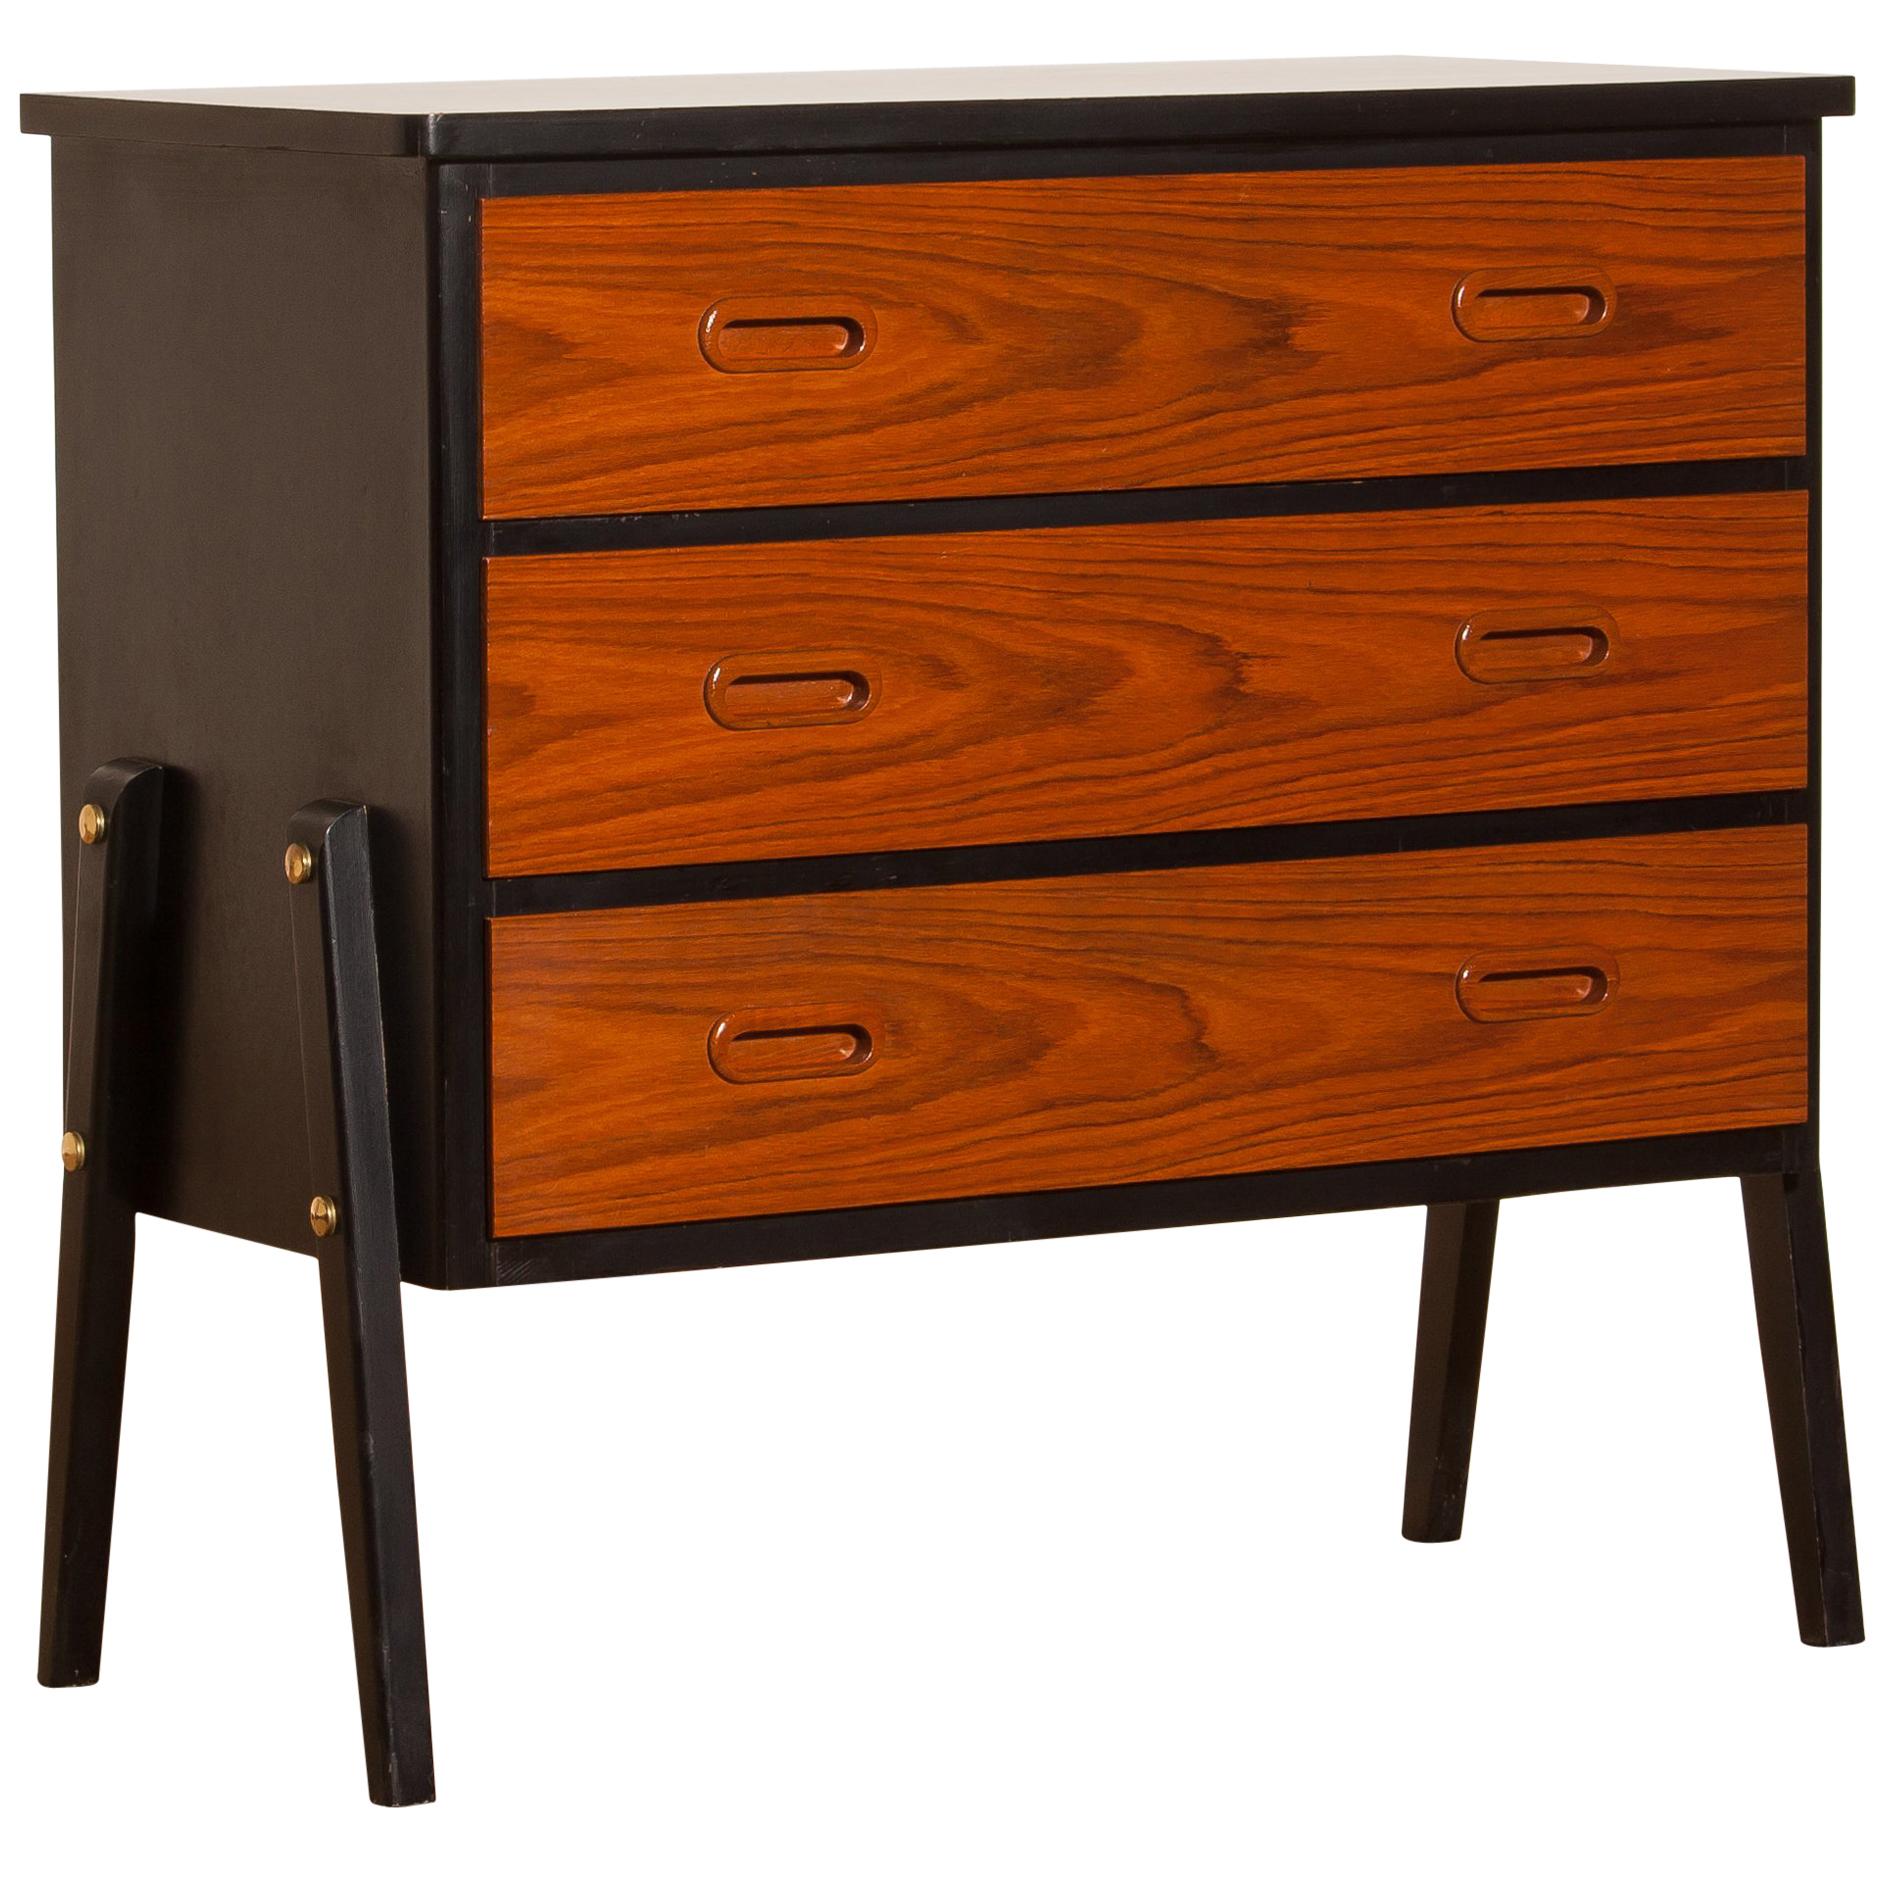 Beautiful small chest of drawers made by Gyllensvaans Möbler, Sweden (marked).
This chest of drawers is made of teak and has three drawers.
It looks great with the black details and is in a very nice condition.
Period 1960s.
Dimensions: H 68 cm,